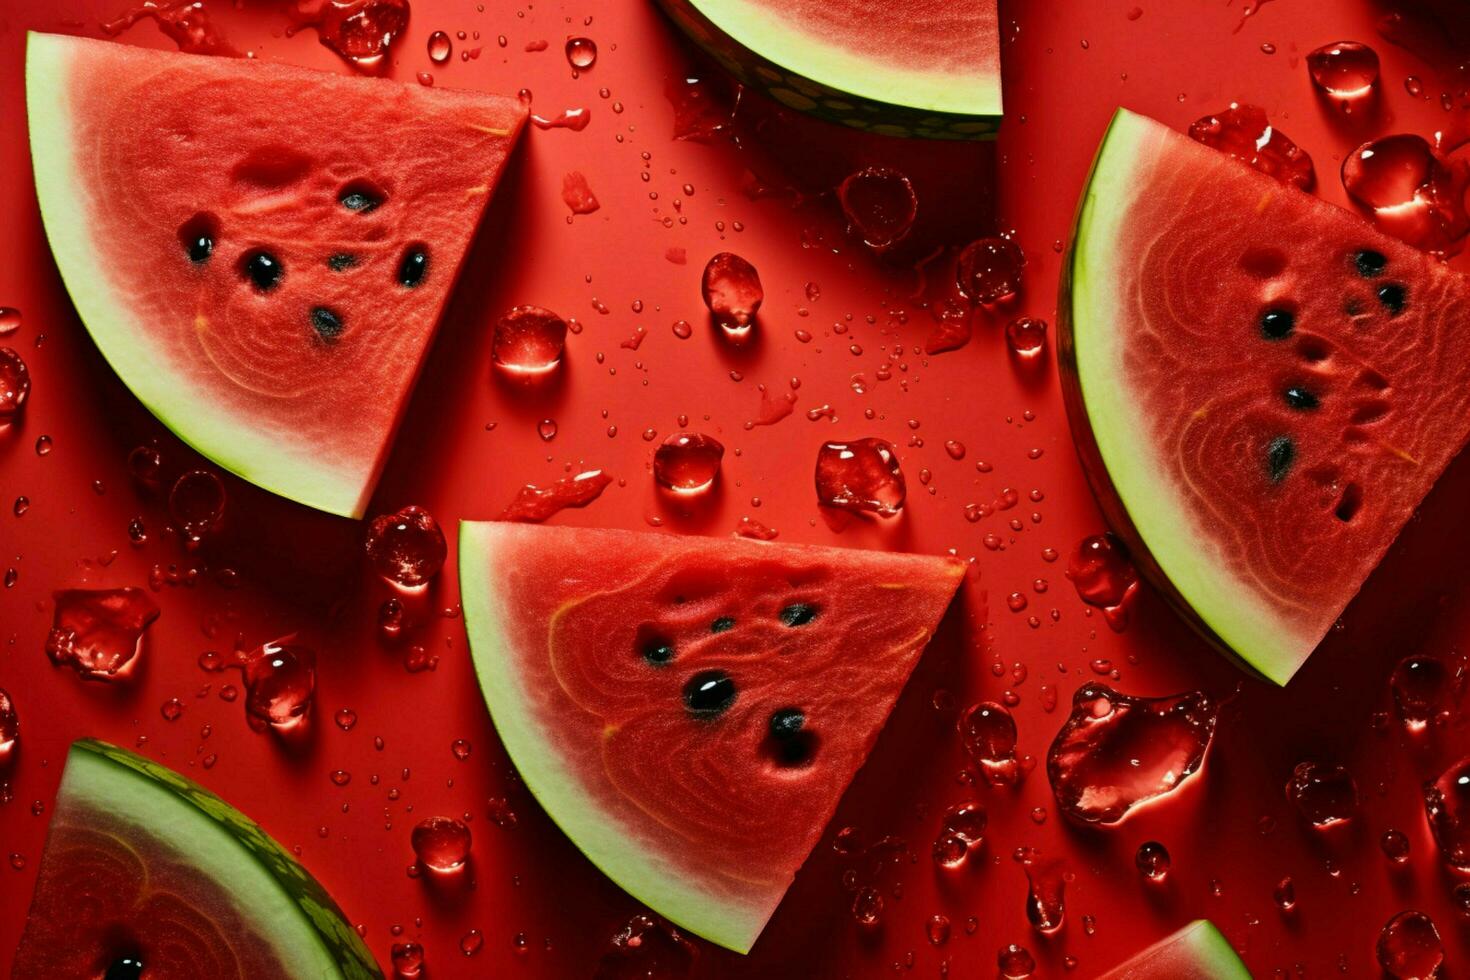 The fresh watermelon background is adorned with spa photo